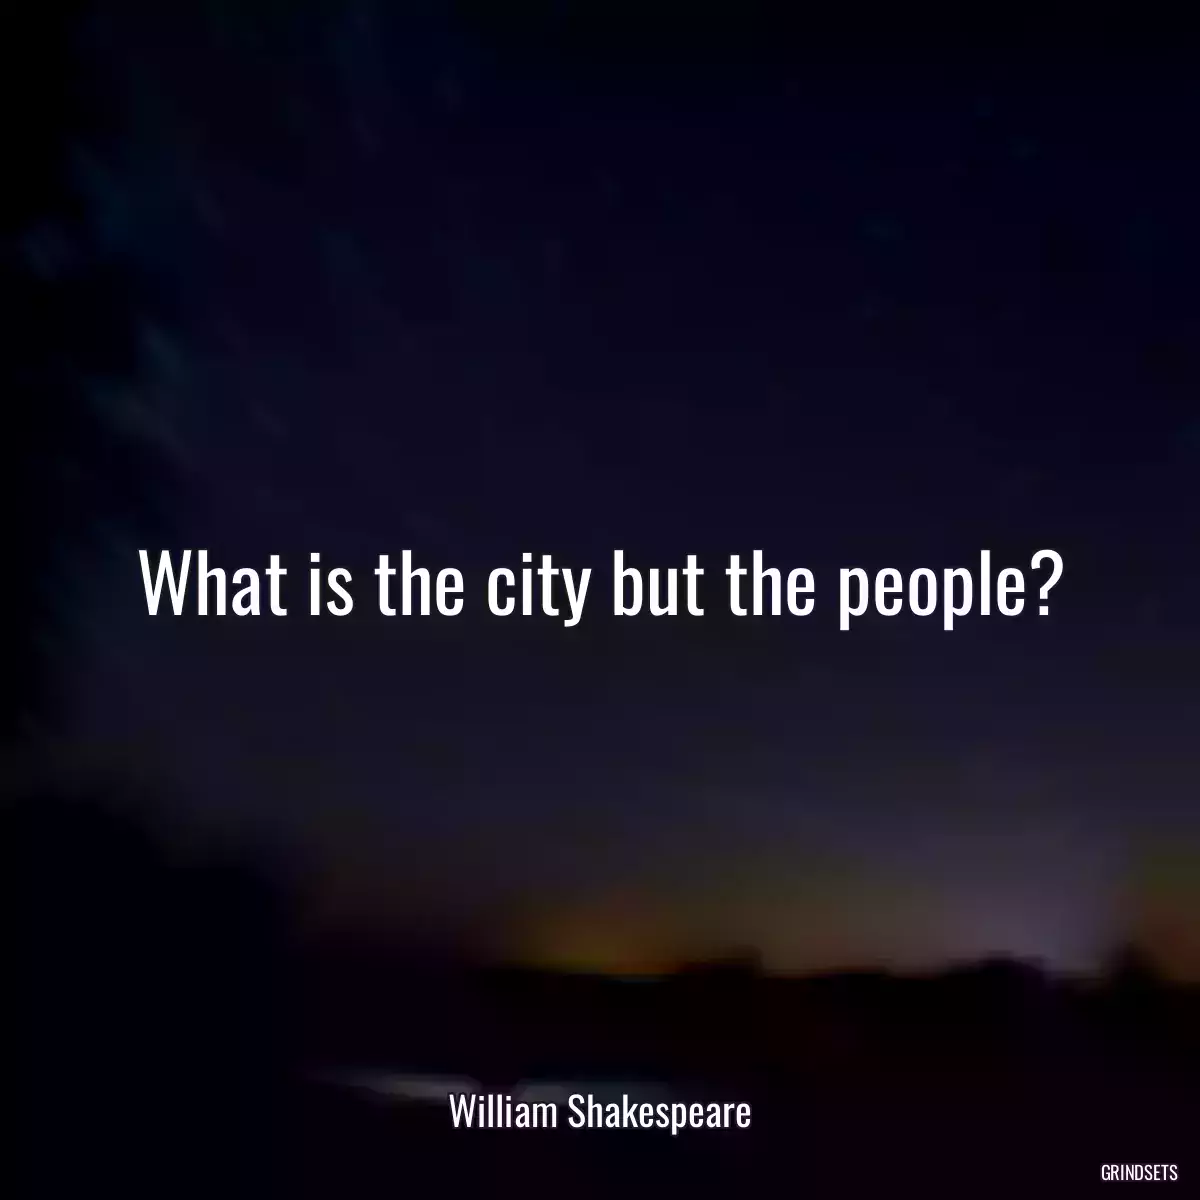 What is the city but the people?